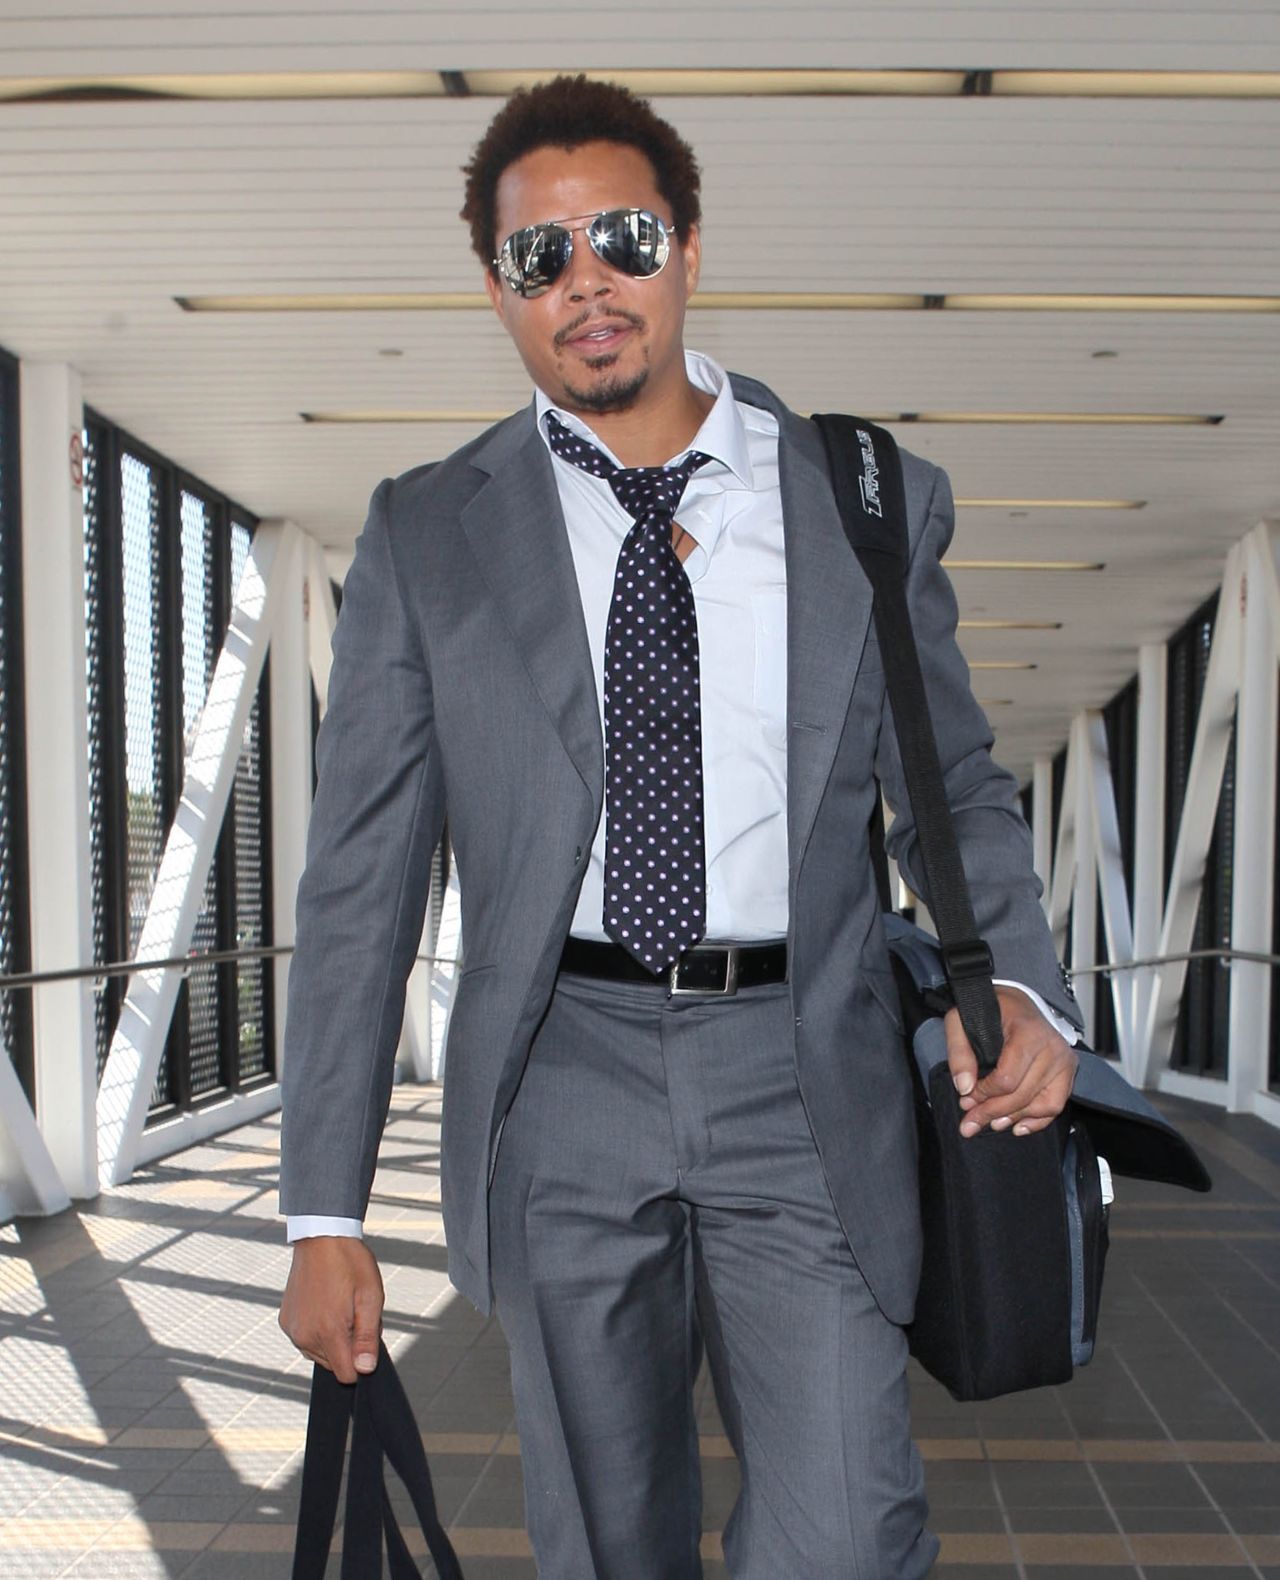 Terrence Howard looks dapper as he heads out of Los Angeles on September 3.